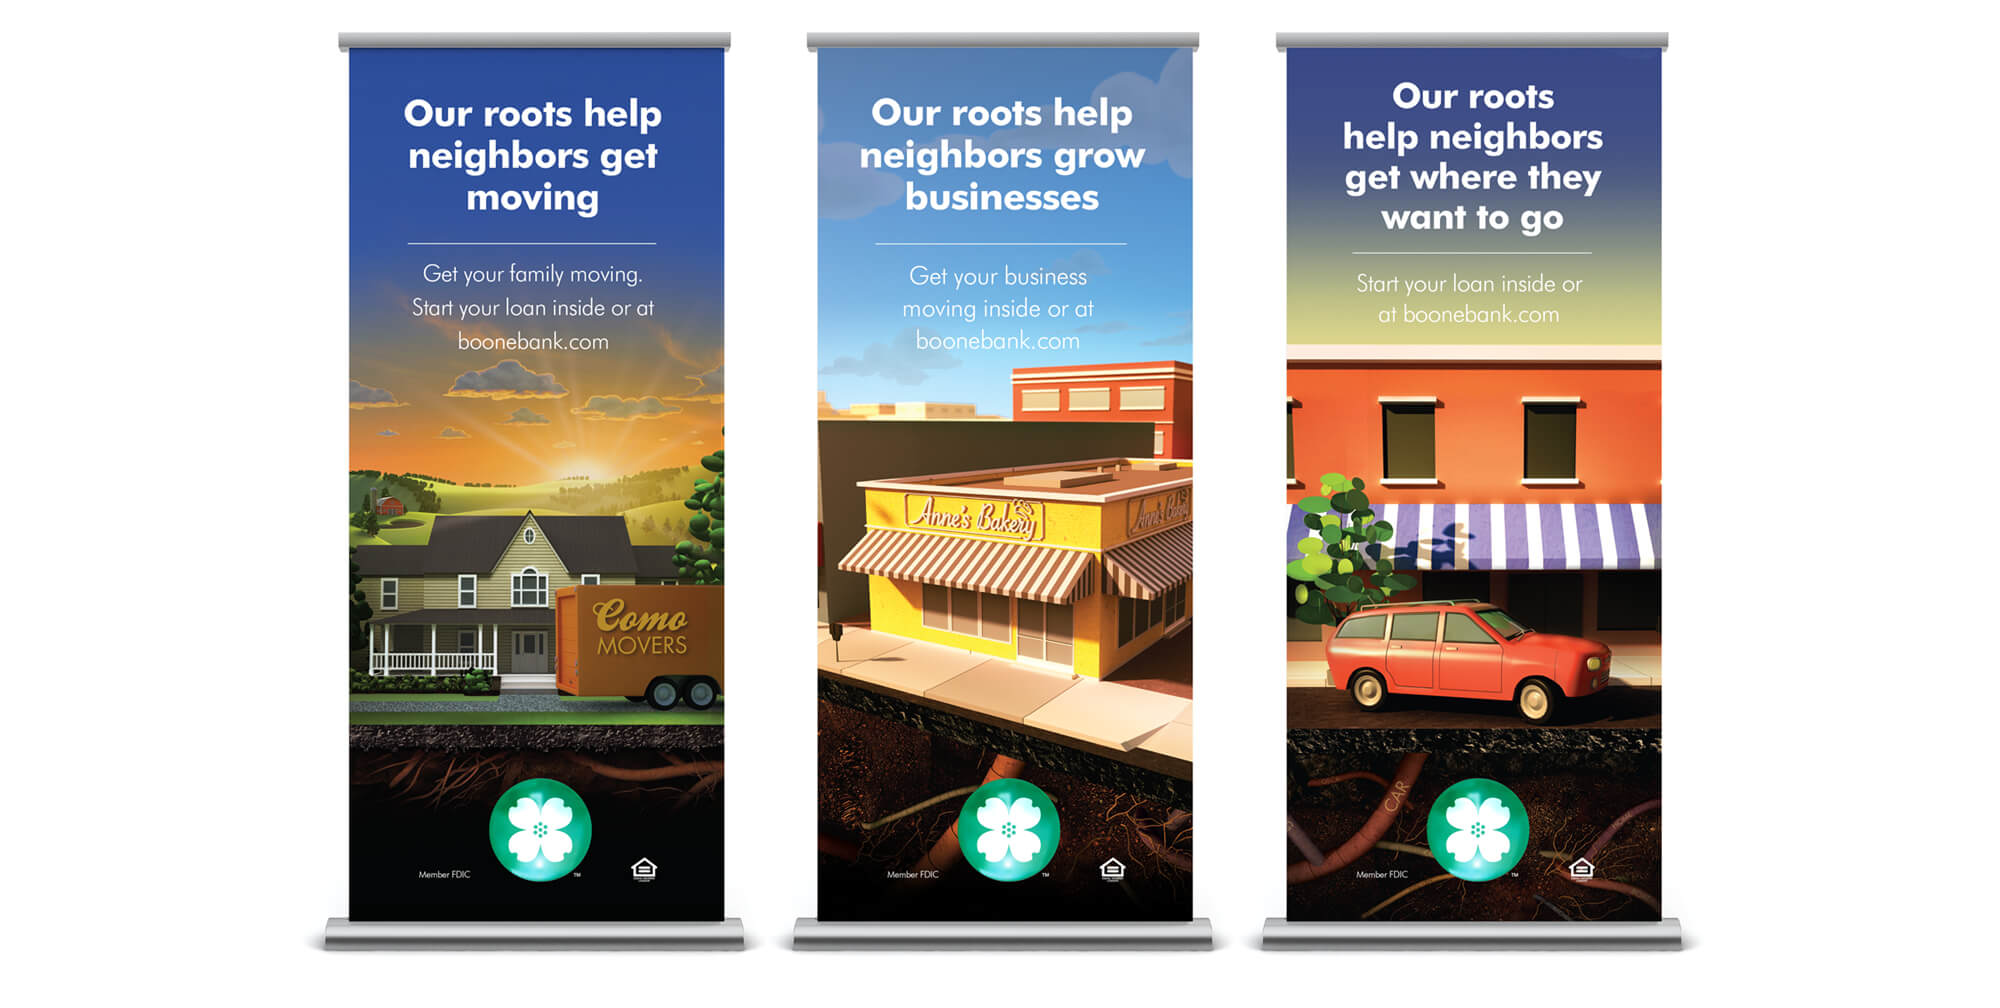 Boone County Bank Roots Campaign retractable banners